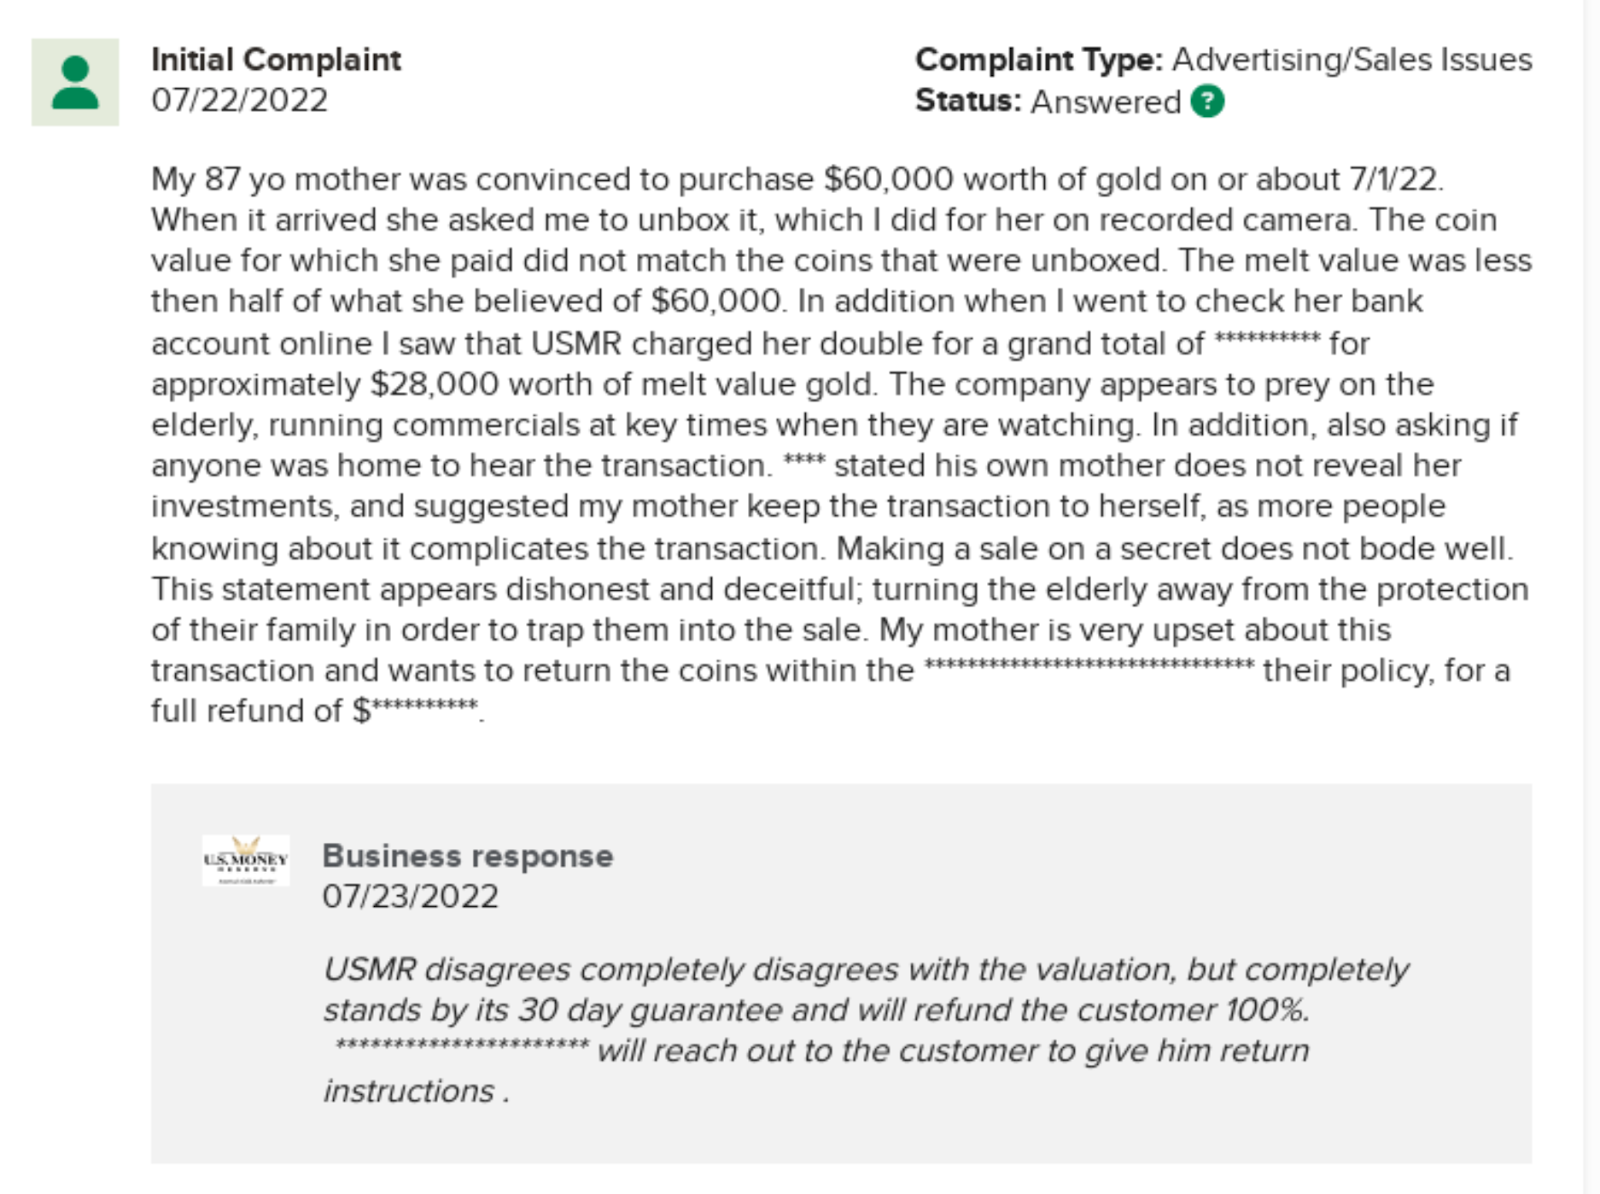 US Money Reserve complaints on BBB by a user. The user alleges fraudulent practices.